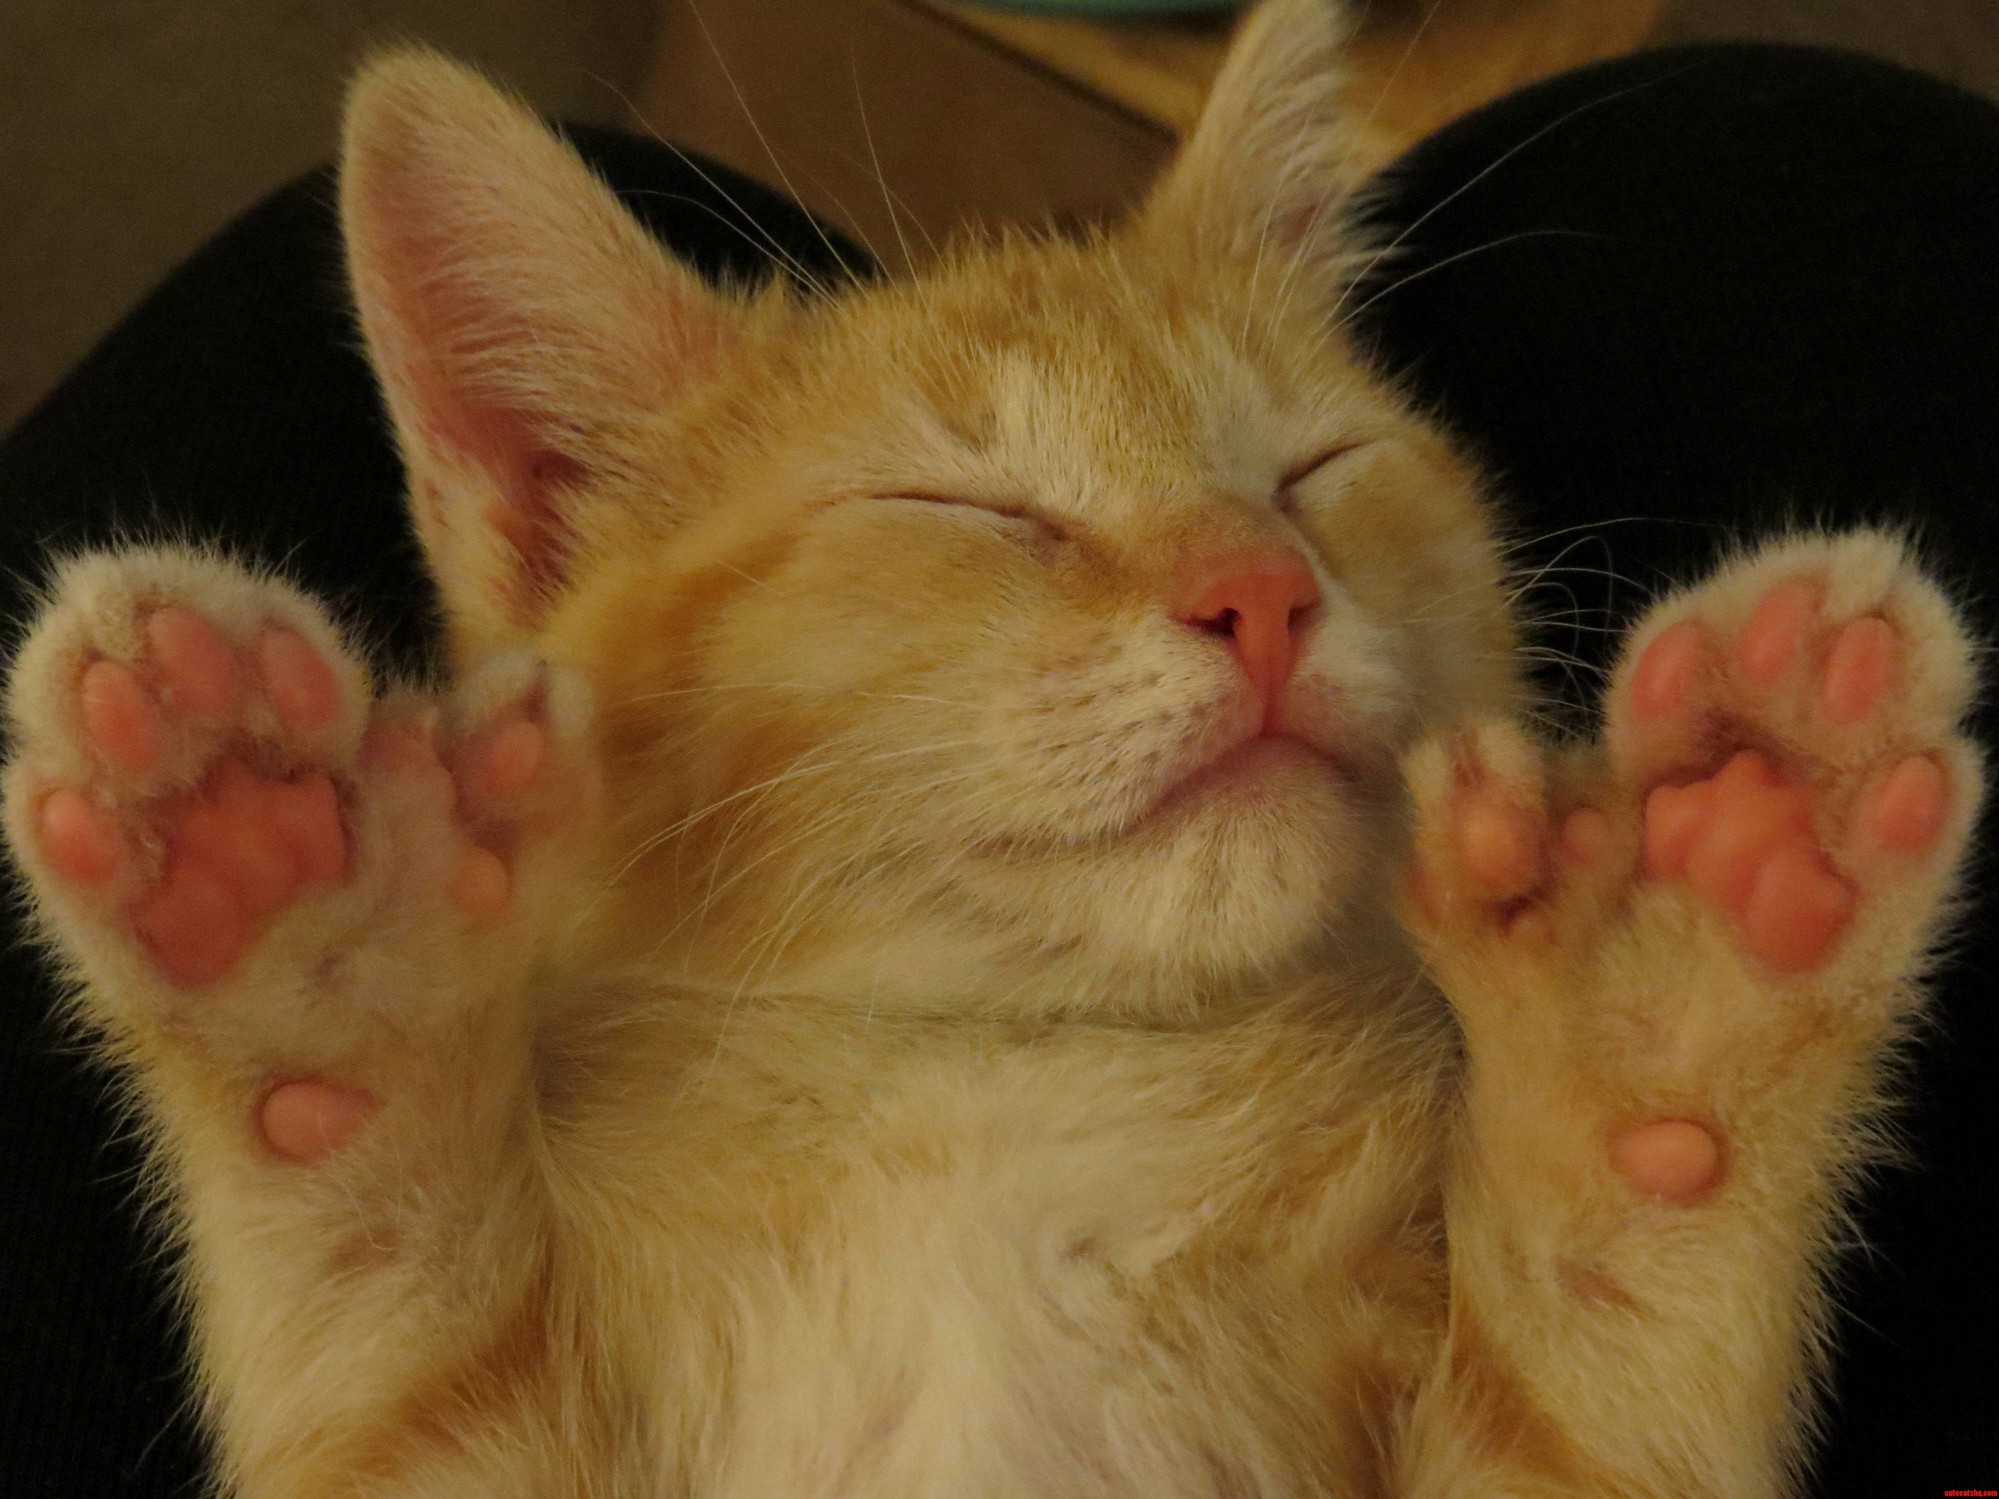 Our foster kitten Fonzie has nine toes on each foot.